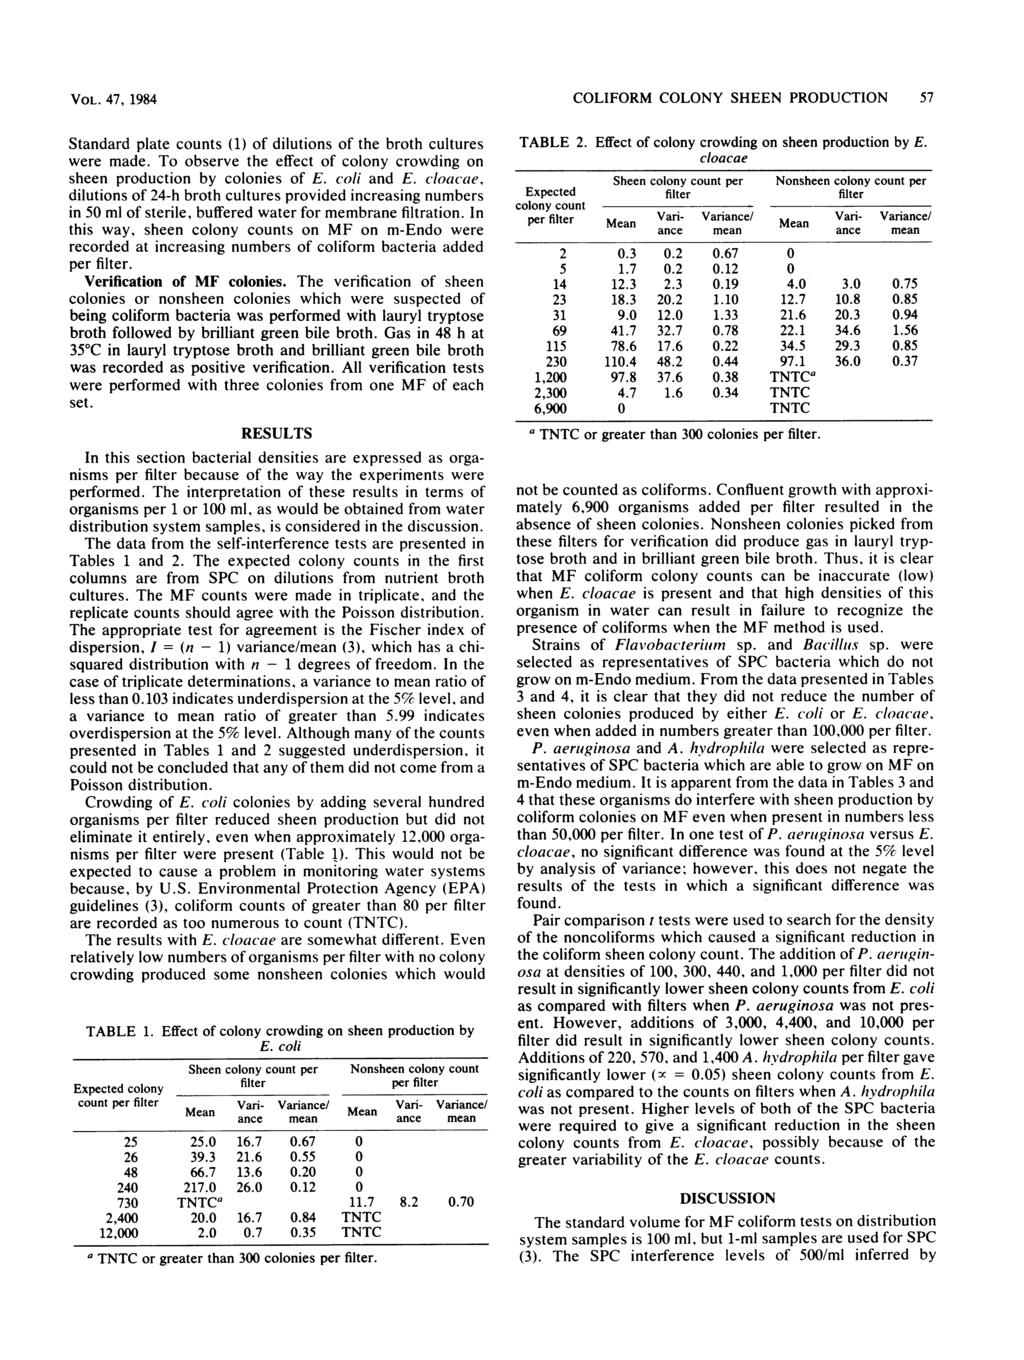 VOL., 4 Standard plate counts (1) of dilutions of the broth cultures were made. To observe the effect of colony crowding on sheen pruction by colonies of E. coli and E.